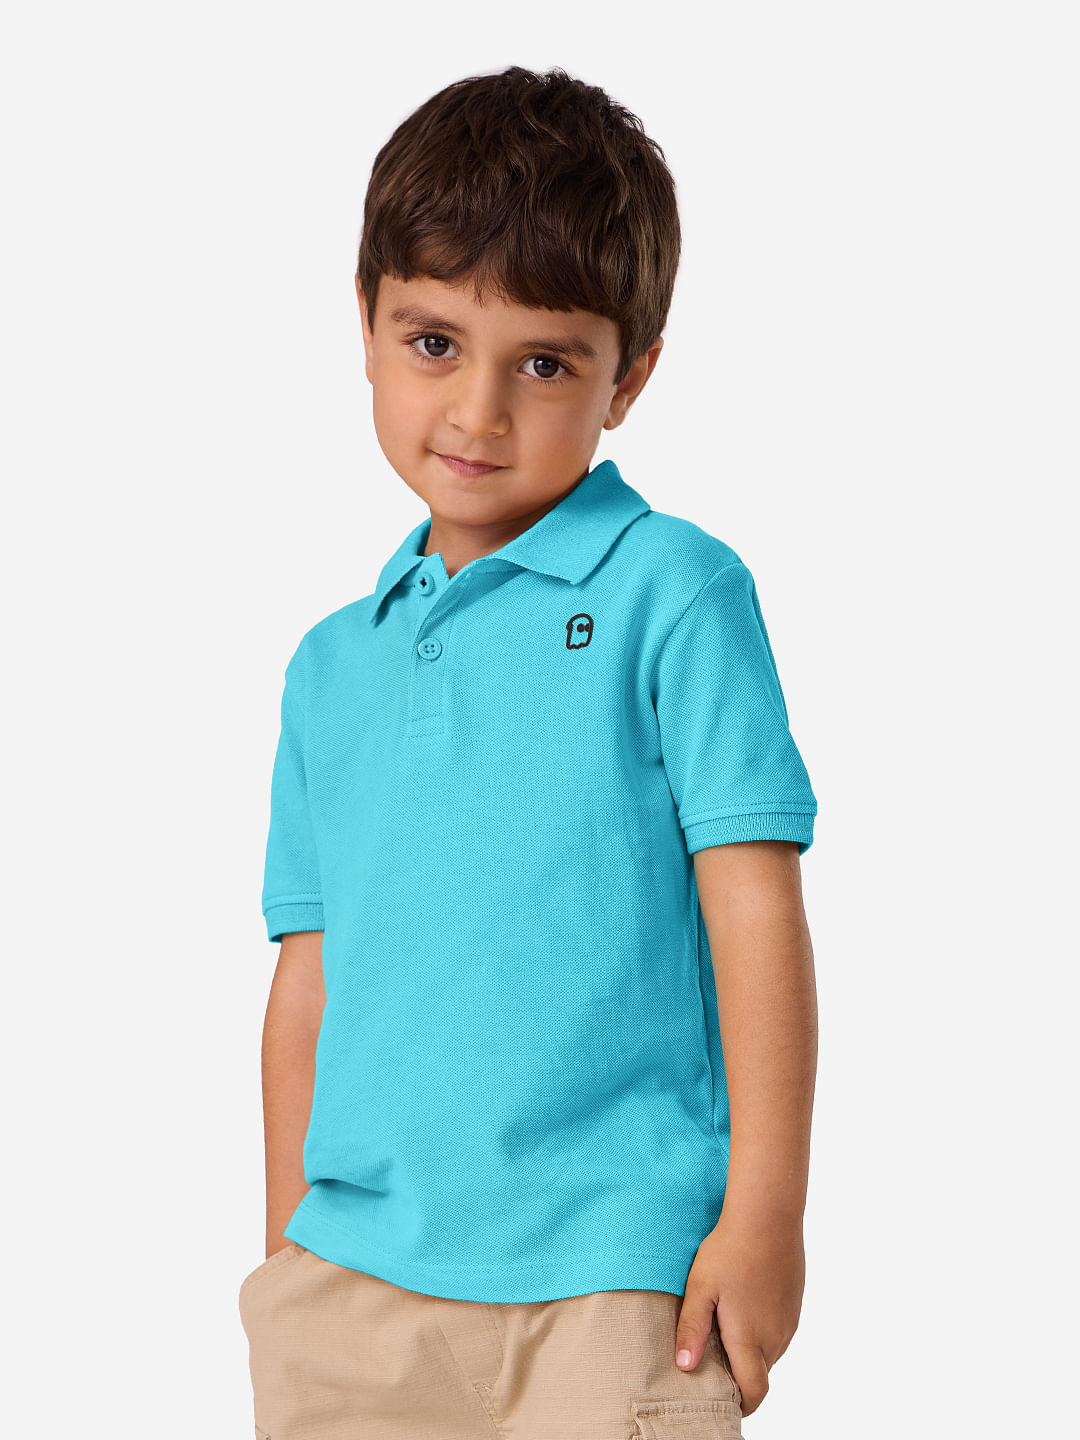 Buy Airy Blue Boys Polo T-shirt Online